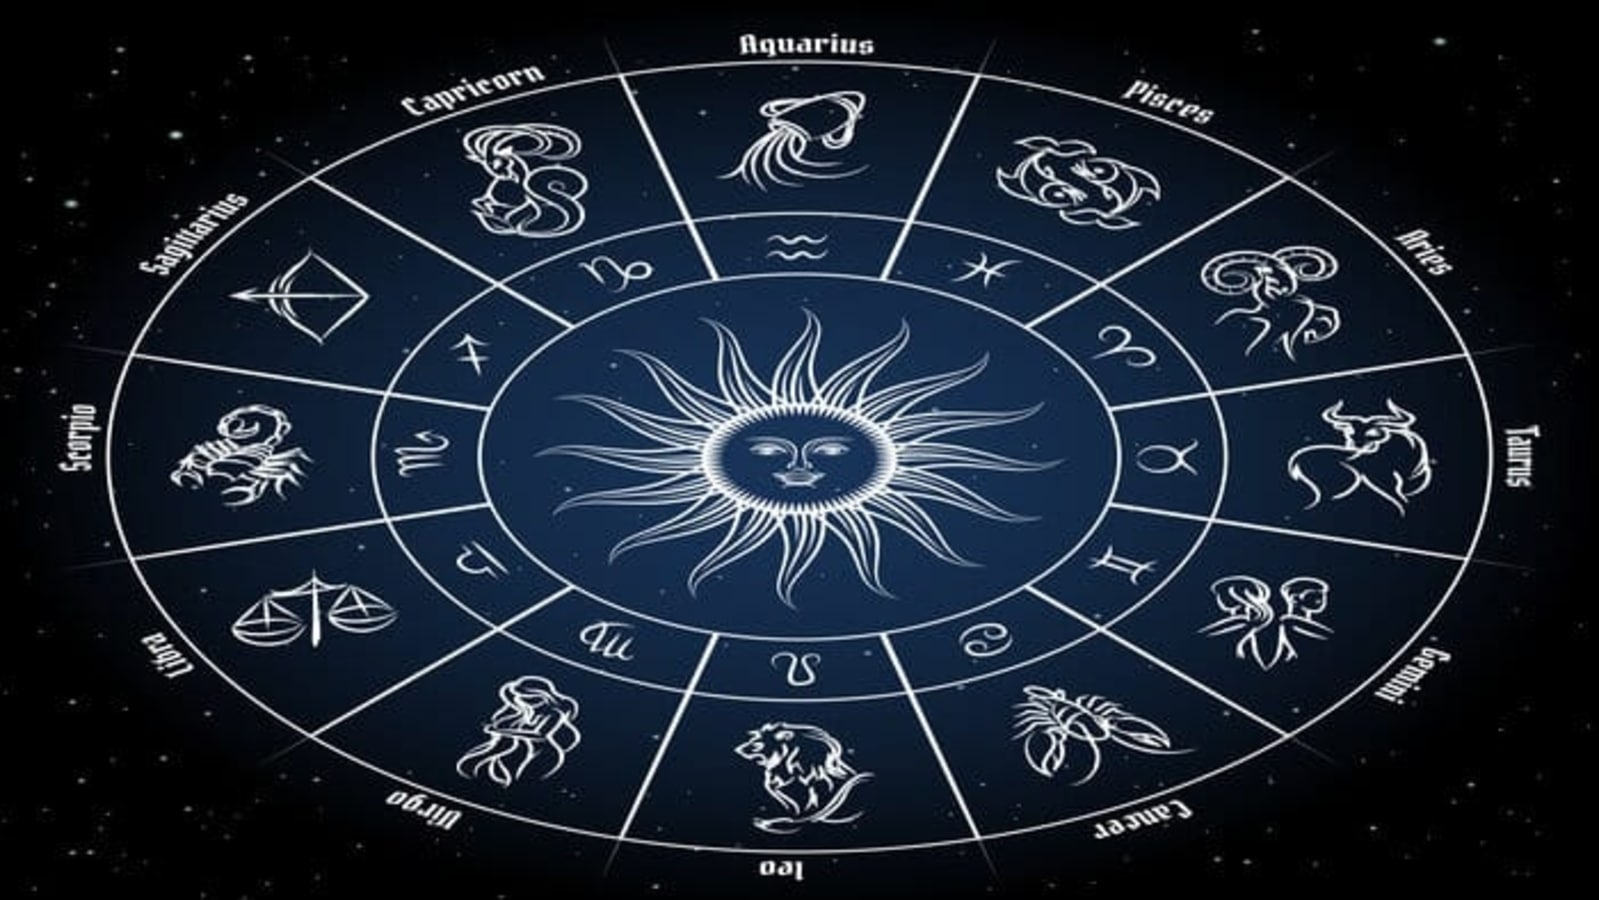 Rising sign - What is your Ascendant sign and what does it mean?